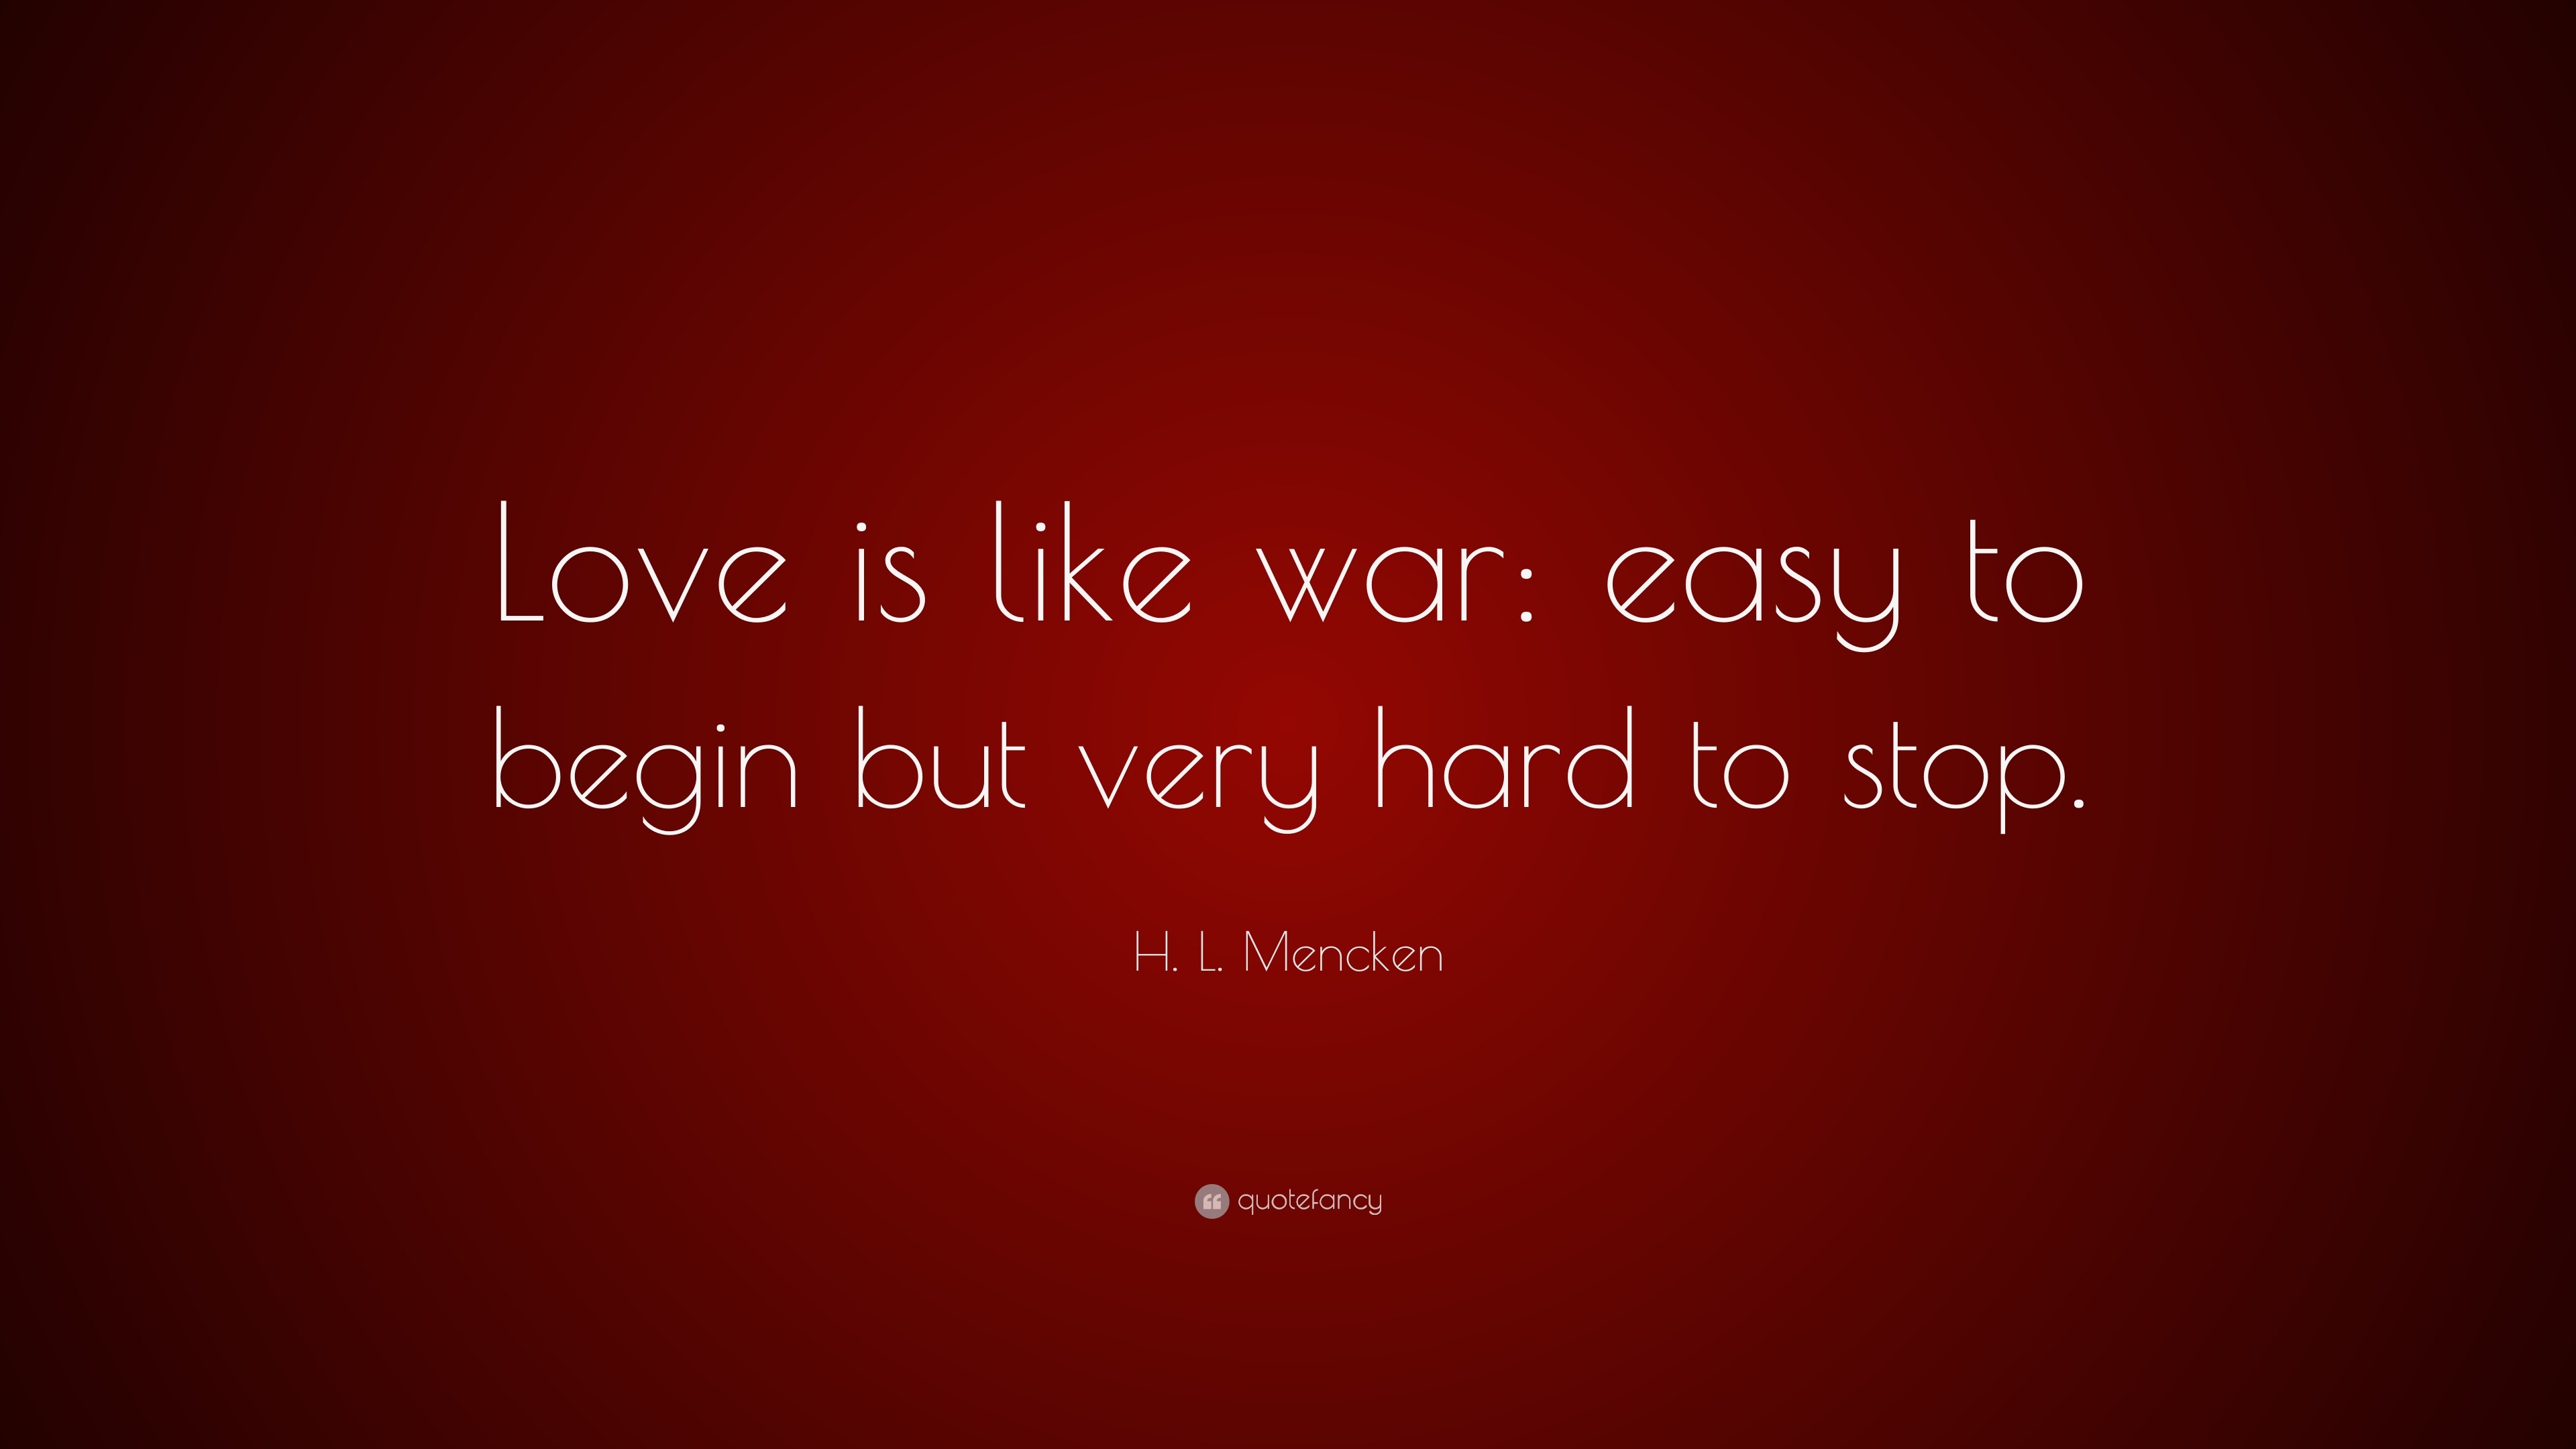 H L Mencken Quote Love Is Like War Easy To Begin But Very Hard To Stop